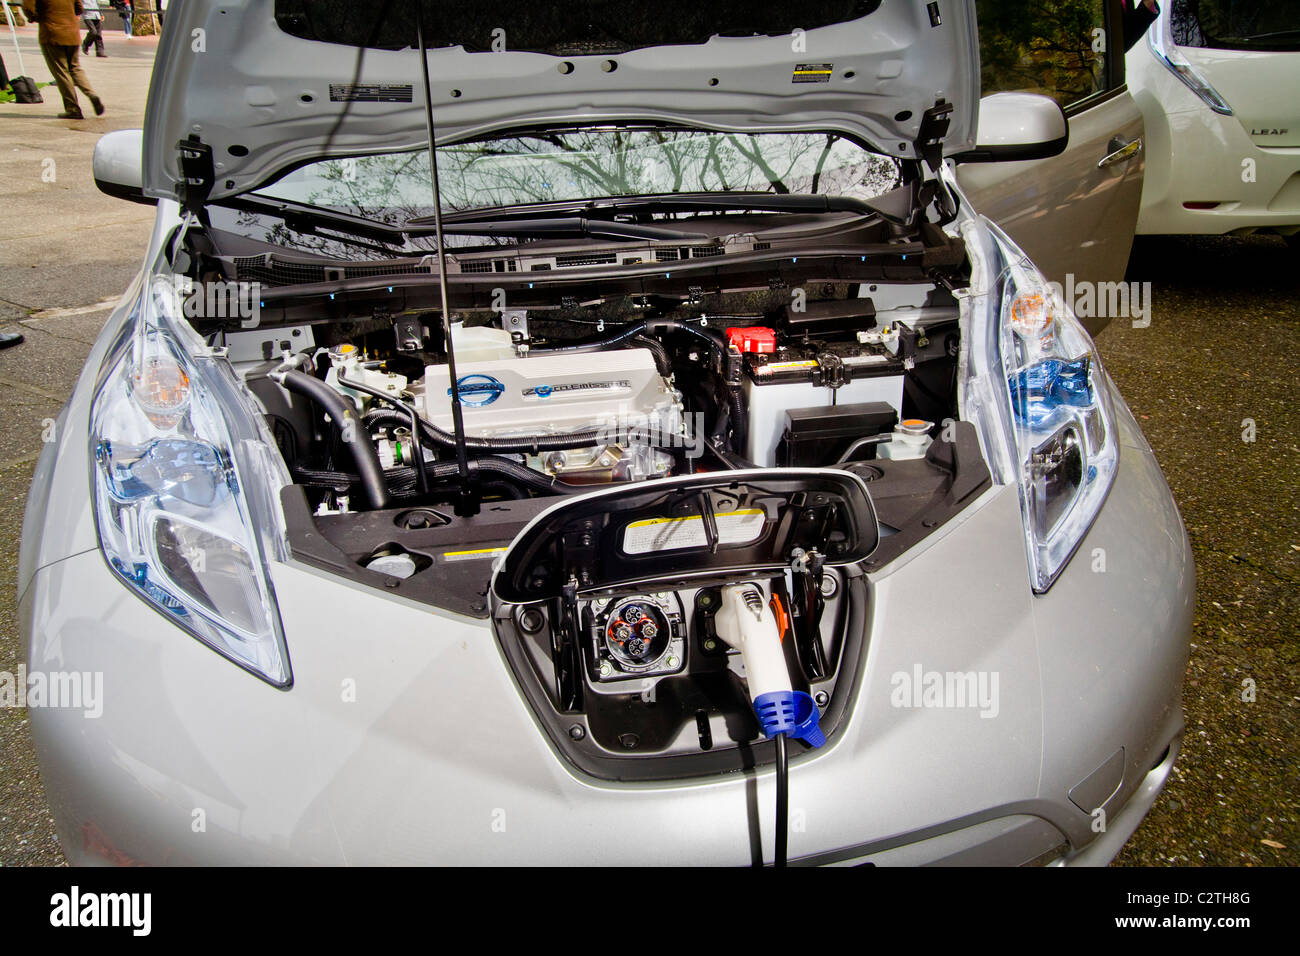 Engine compartment and charging port of the Nissan Leaf, a five-door mid-size hatchback all-electric zero-emissions car. Stock Photo